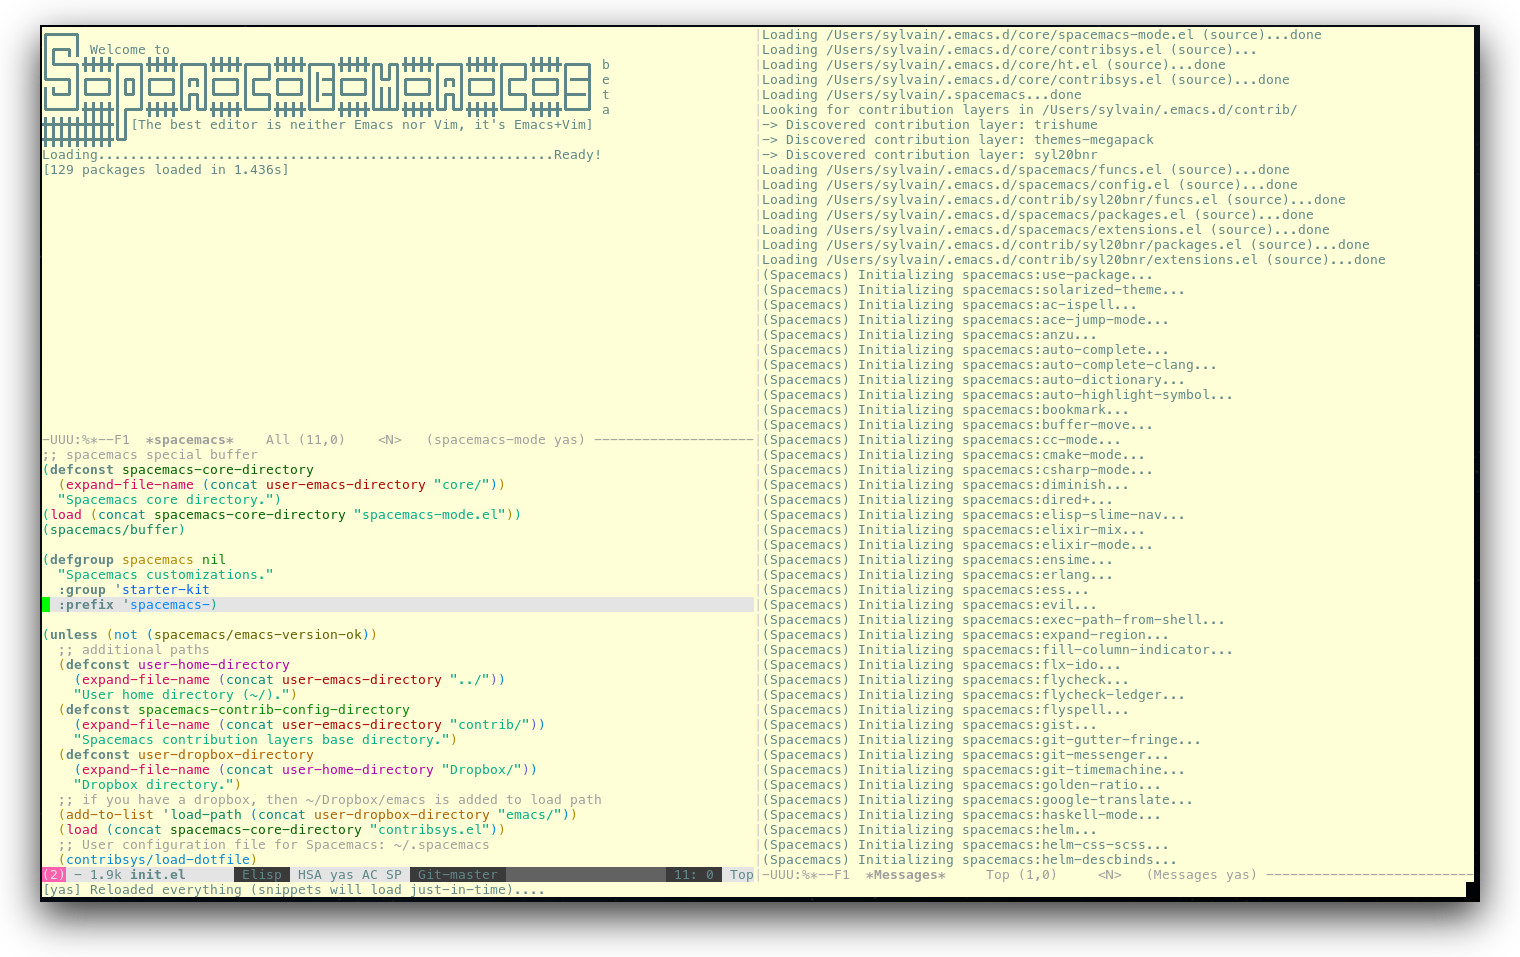 /TakeV/spacemacs/media/commit/b76ce3c311e67e5f19dce66a6f51a7bd072420ac/doc/img/spacemacs-urxvt.png